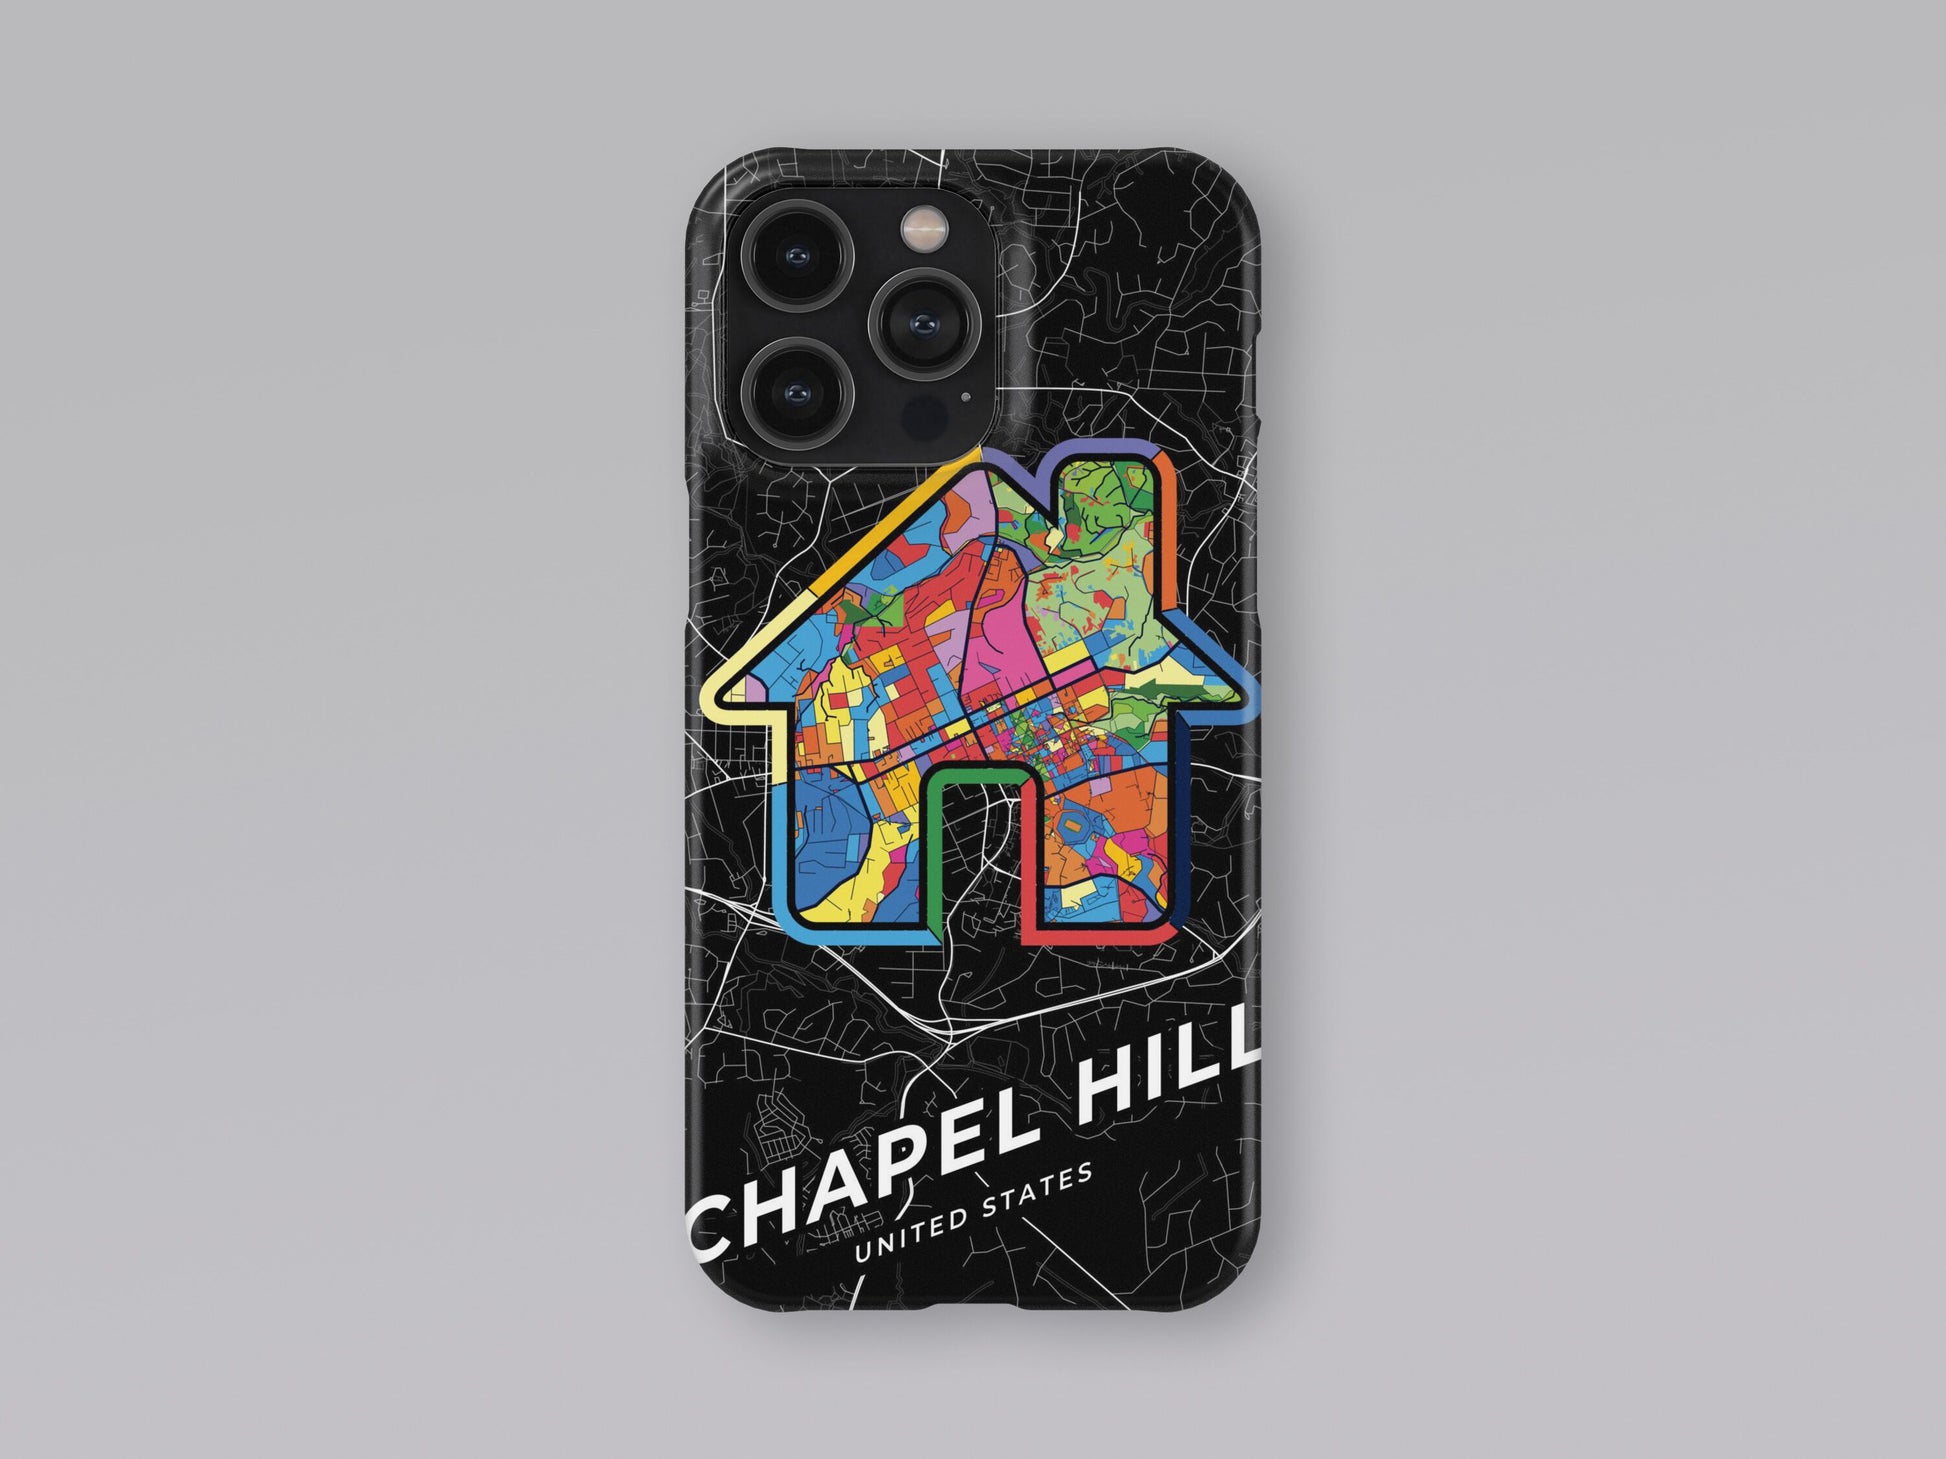 Chapel Hill North Carolina slim phone case with colorful icon. Birthday, wedding or housewarming gift. Couple match cases. 3